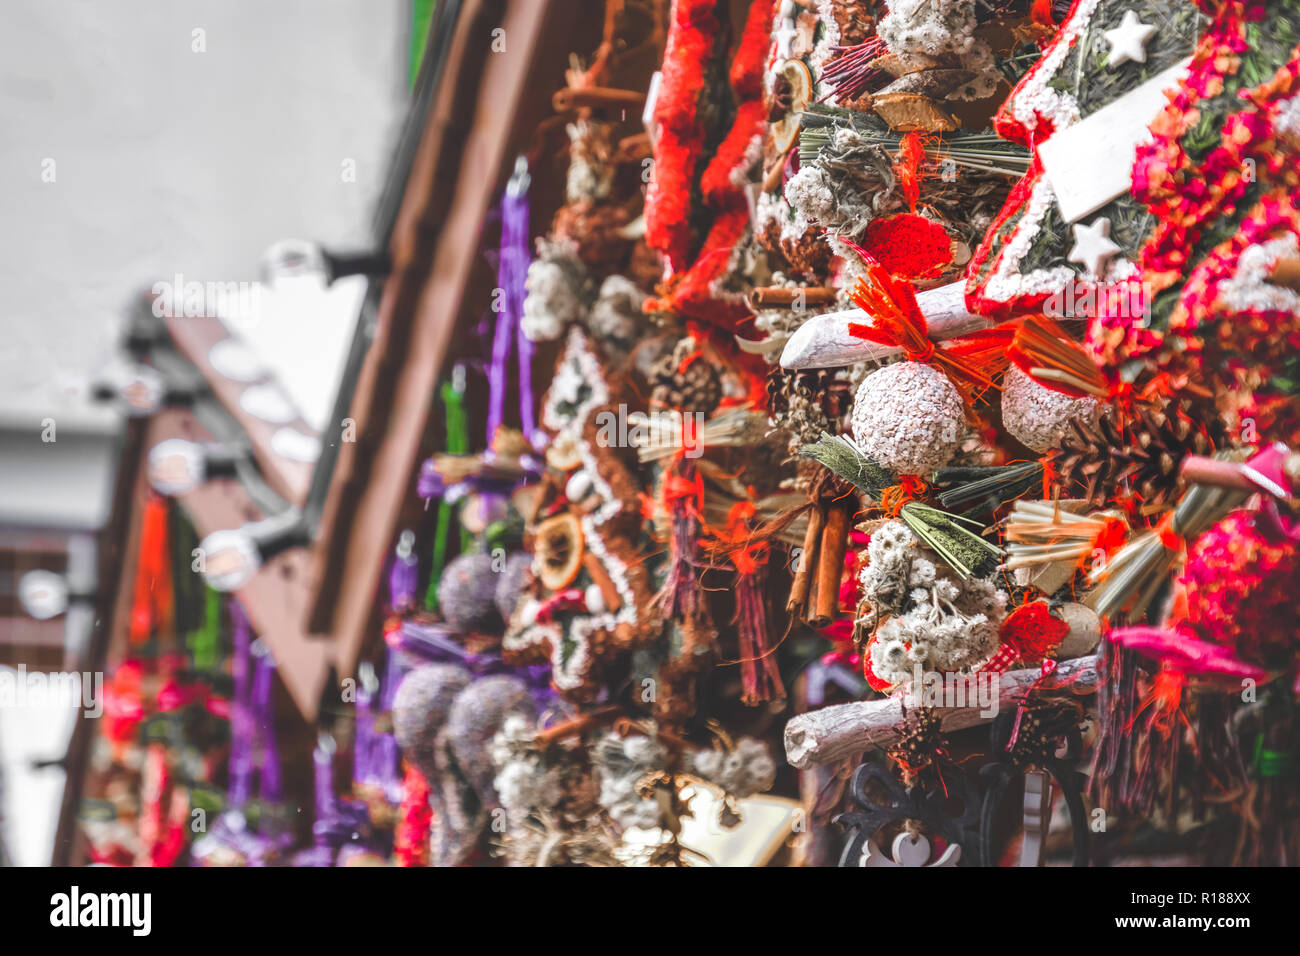 red desaturated selective color christmas market wreaths decoration stall details kiosk red Stock Photo